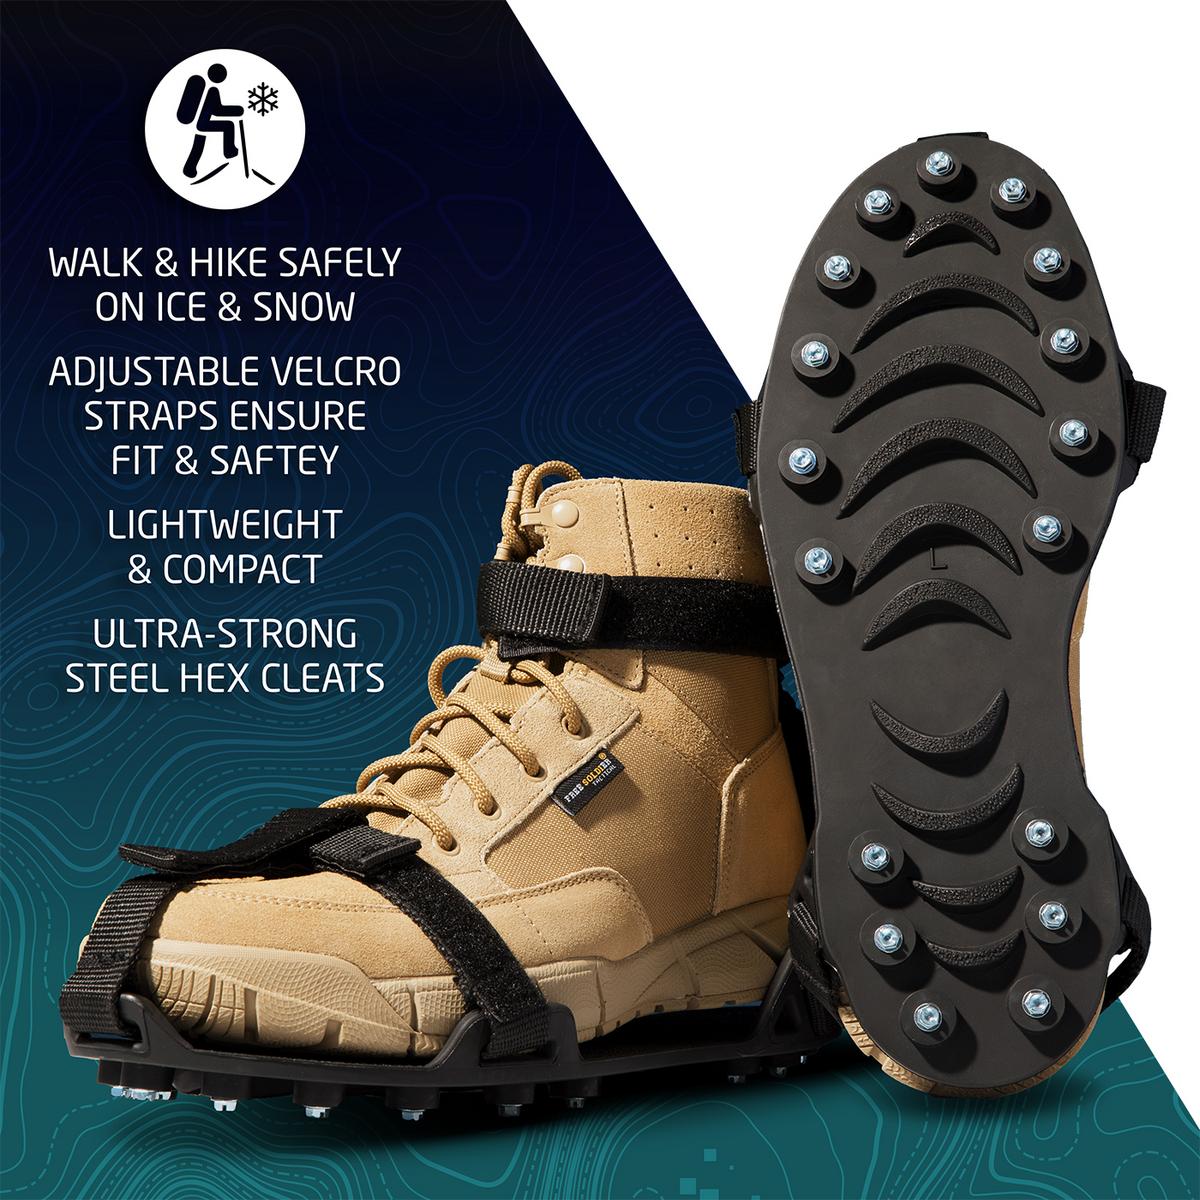 Action Traction Elite Hex Full-Foot Traction Ice Cleats